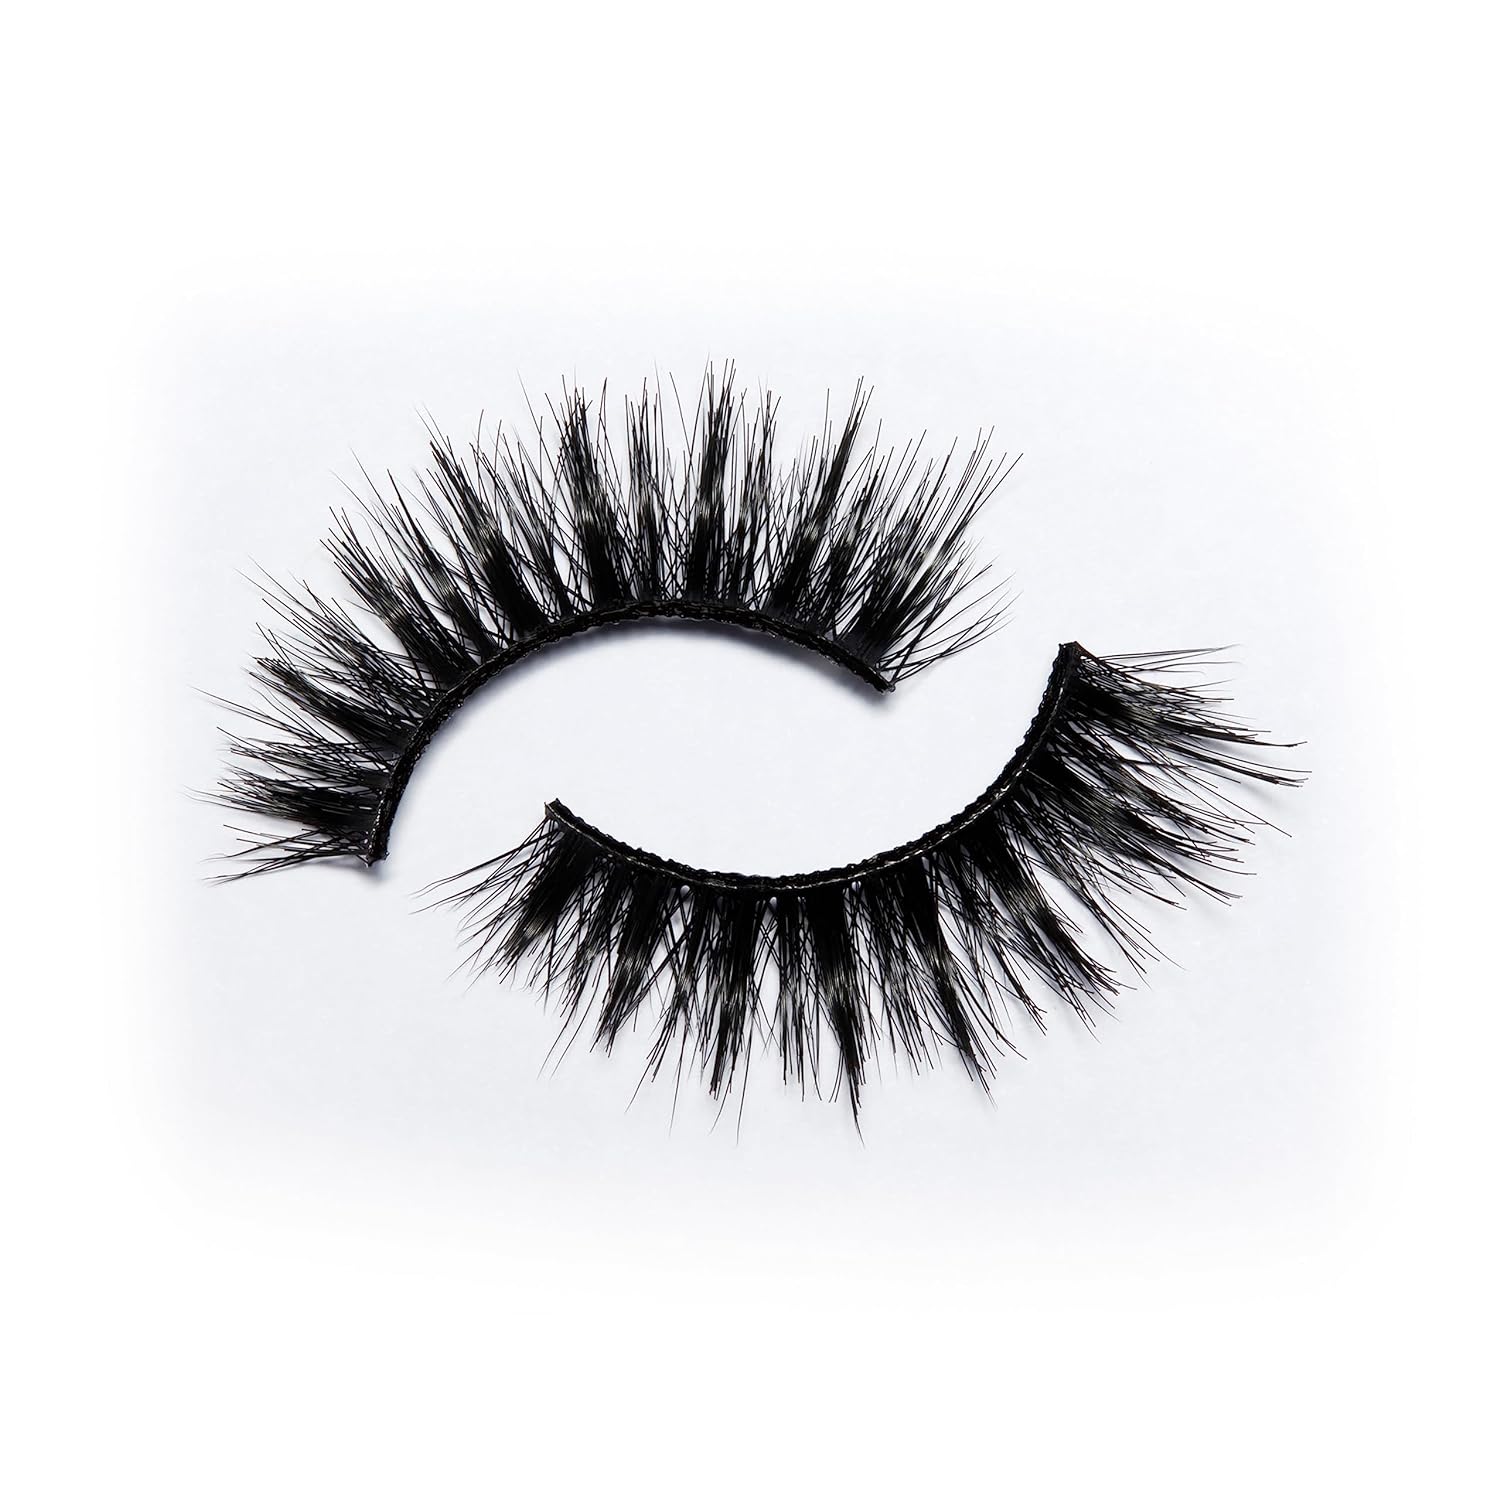 Eylure False Lashes, Definition No. 126 with Adhesive Included, 3 Pair, Black